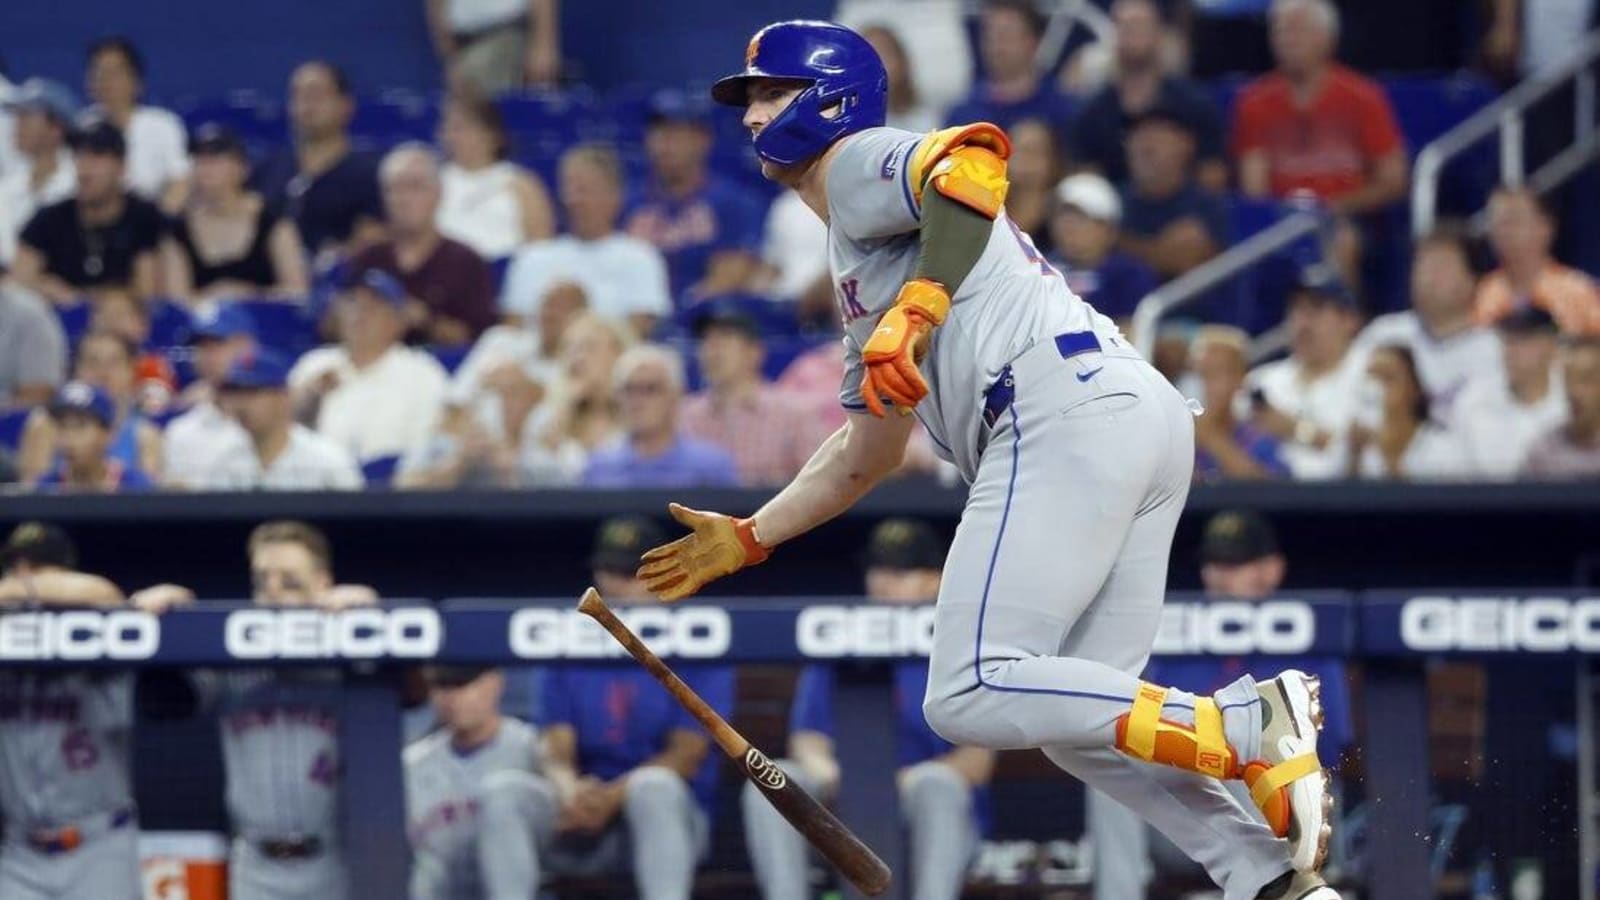 Marlins rally in 9th, defeat Mets in 10th